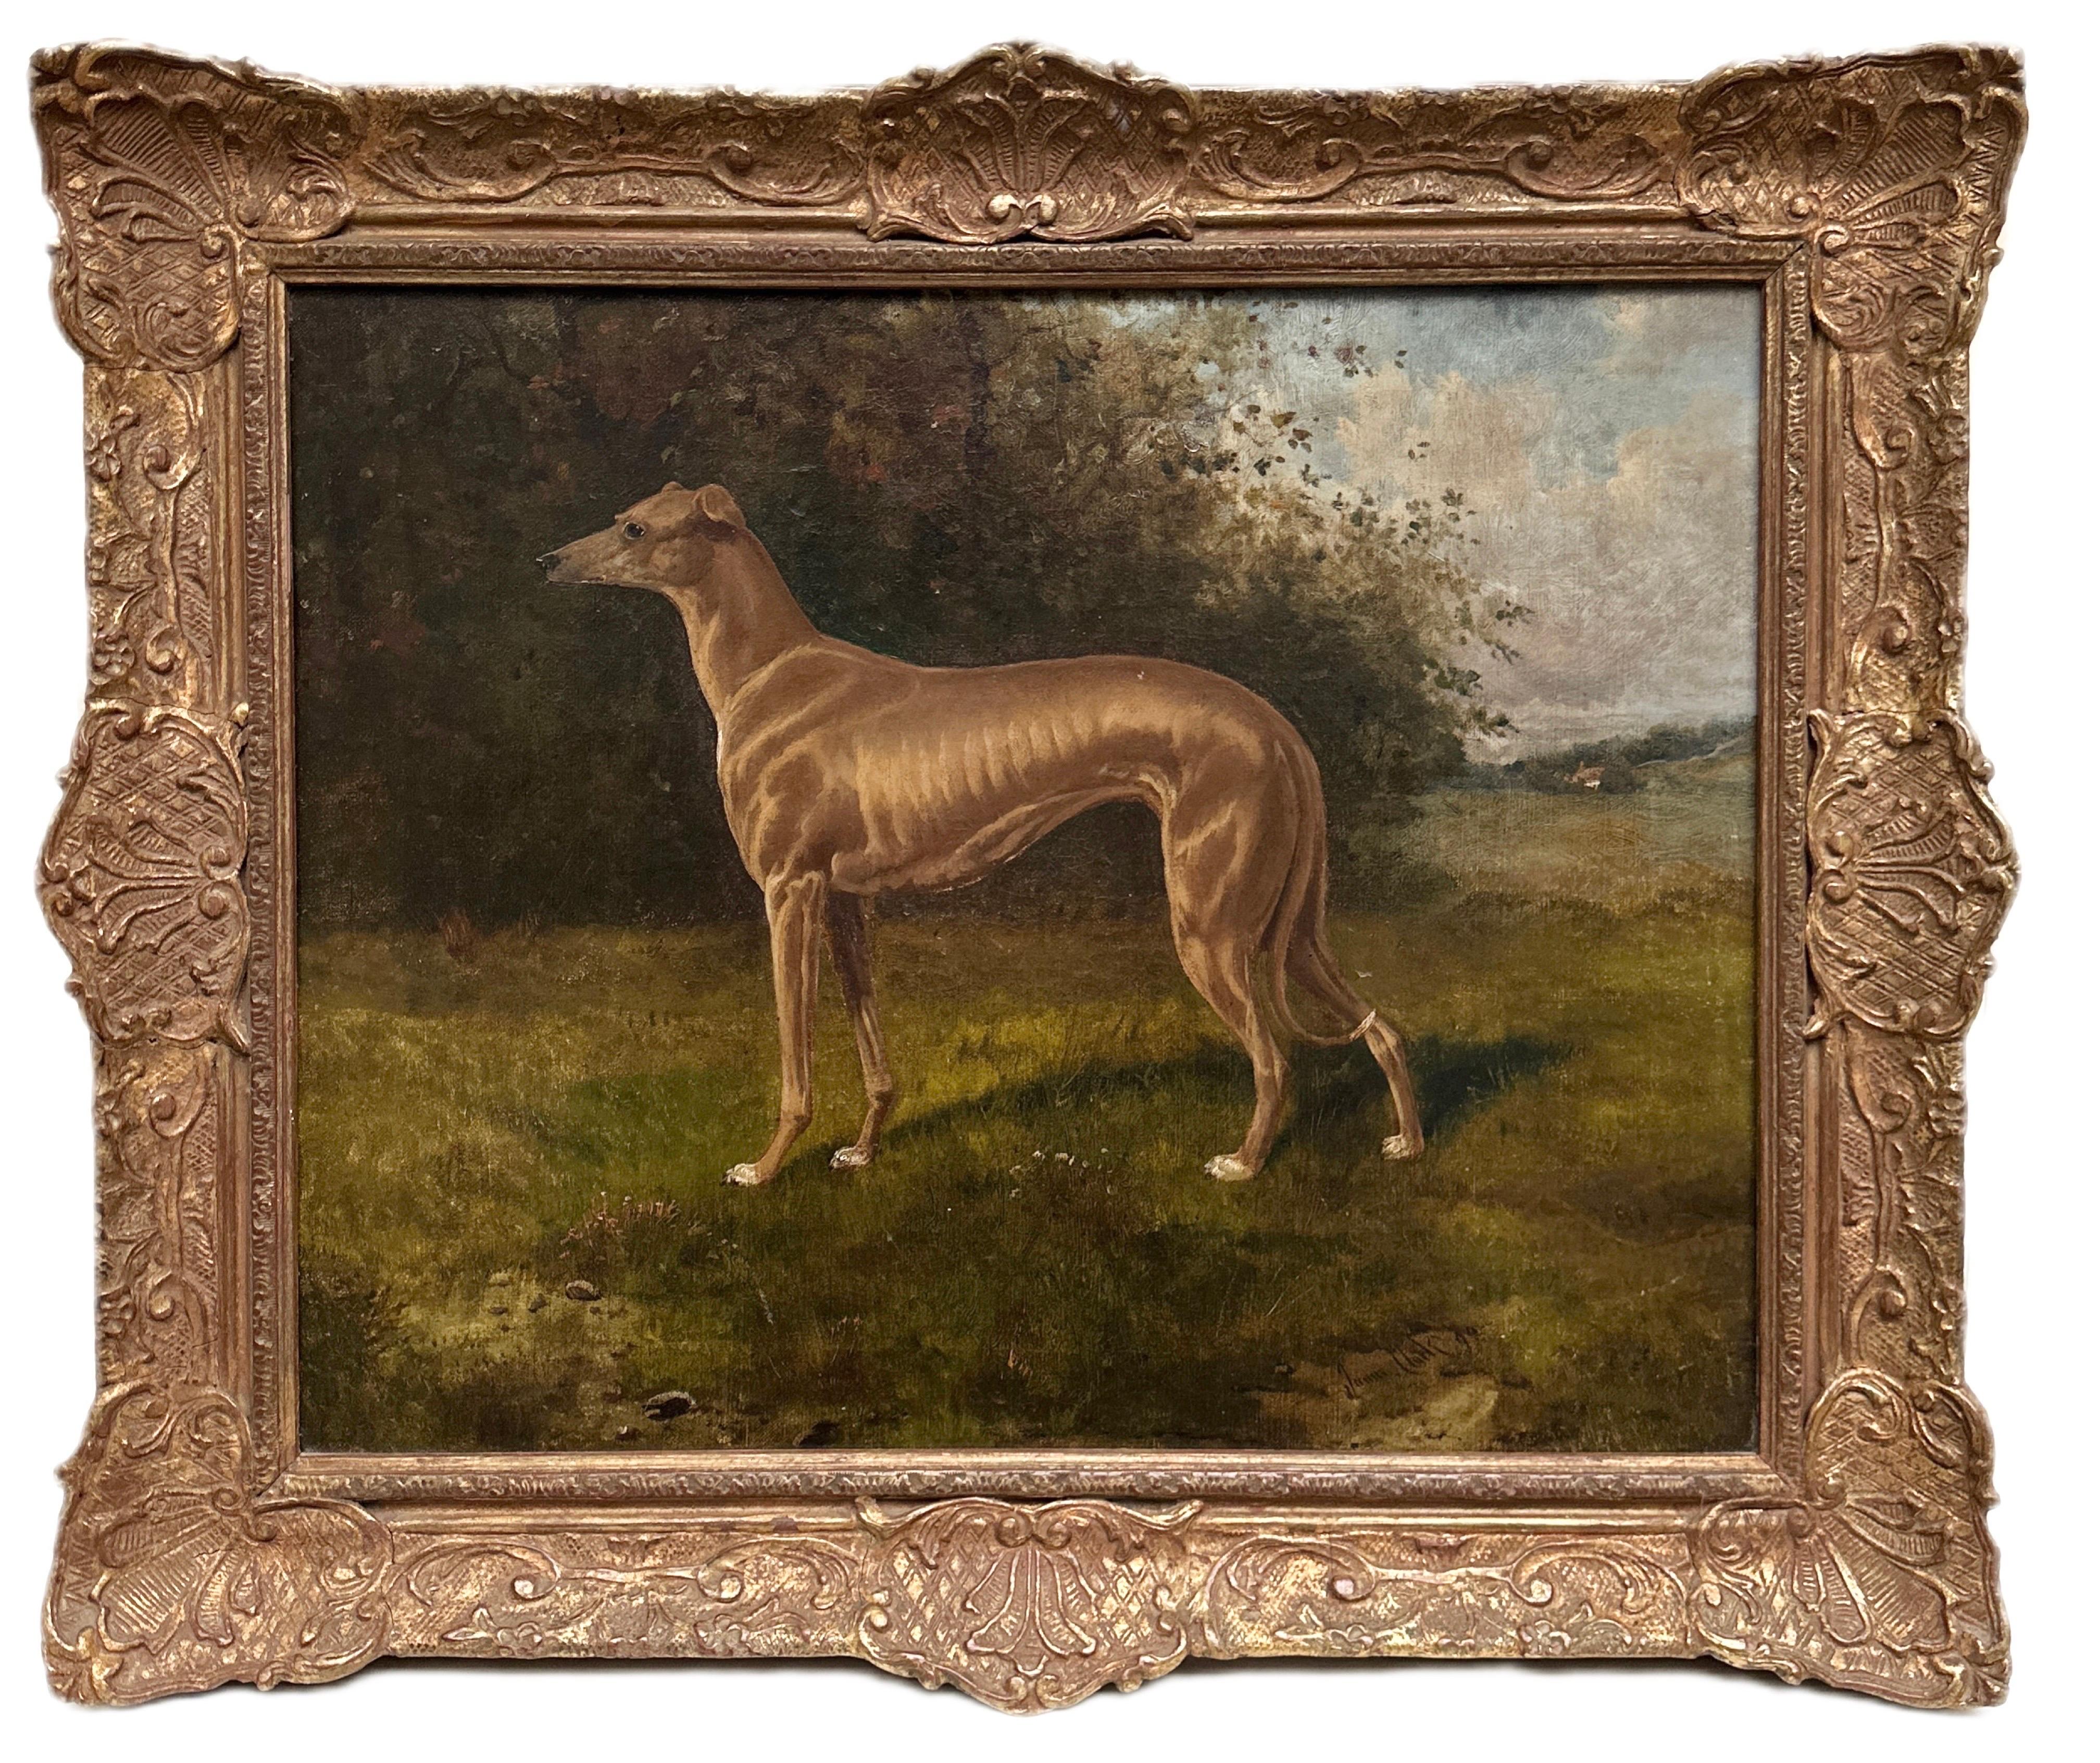 A chestnut coloured greyhound standing in a verdant landscape with a country cottage just visible in the far distance. Signed 'James Clark' (lower right) and dated 1899.
Oil on canvas in a giltwood frame. 

James Albert Clark (1863-1955) was born in